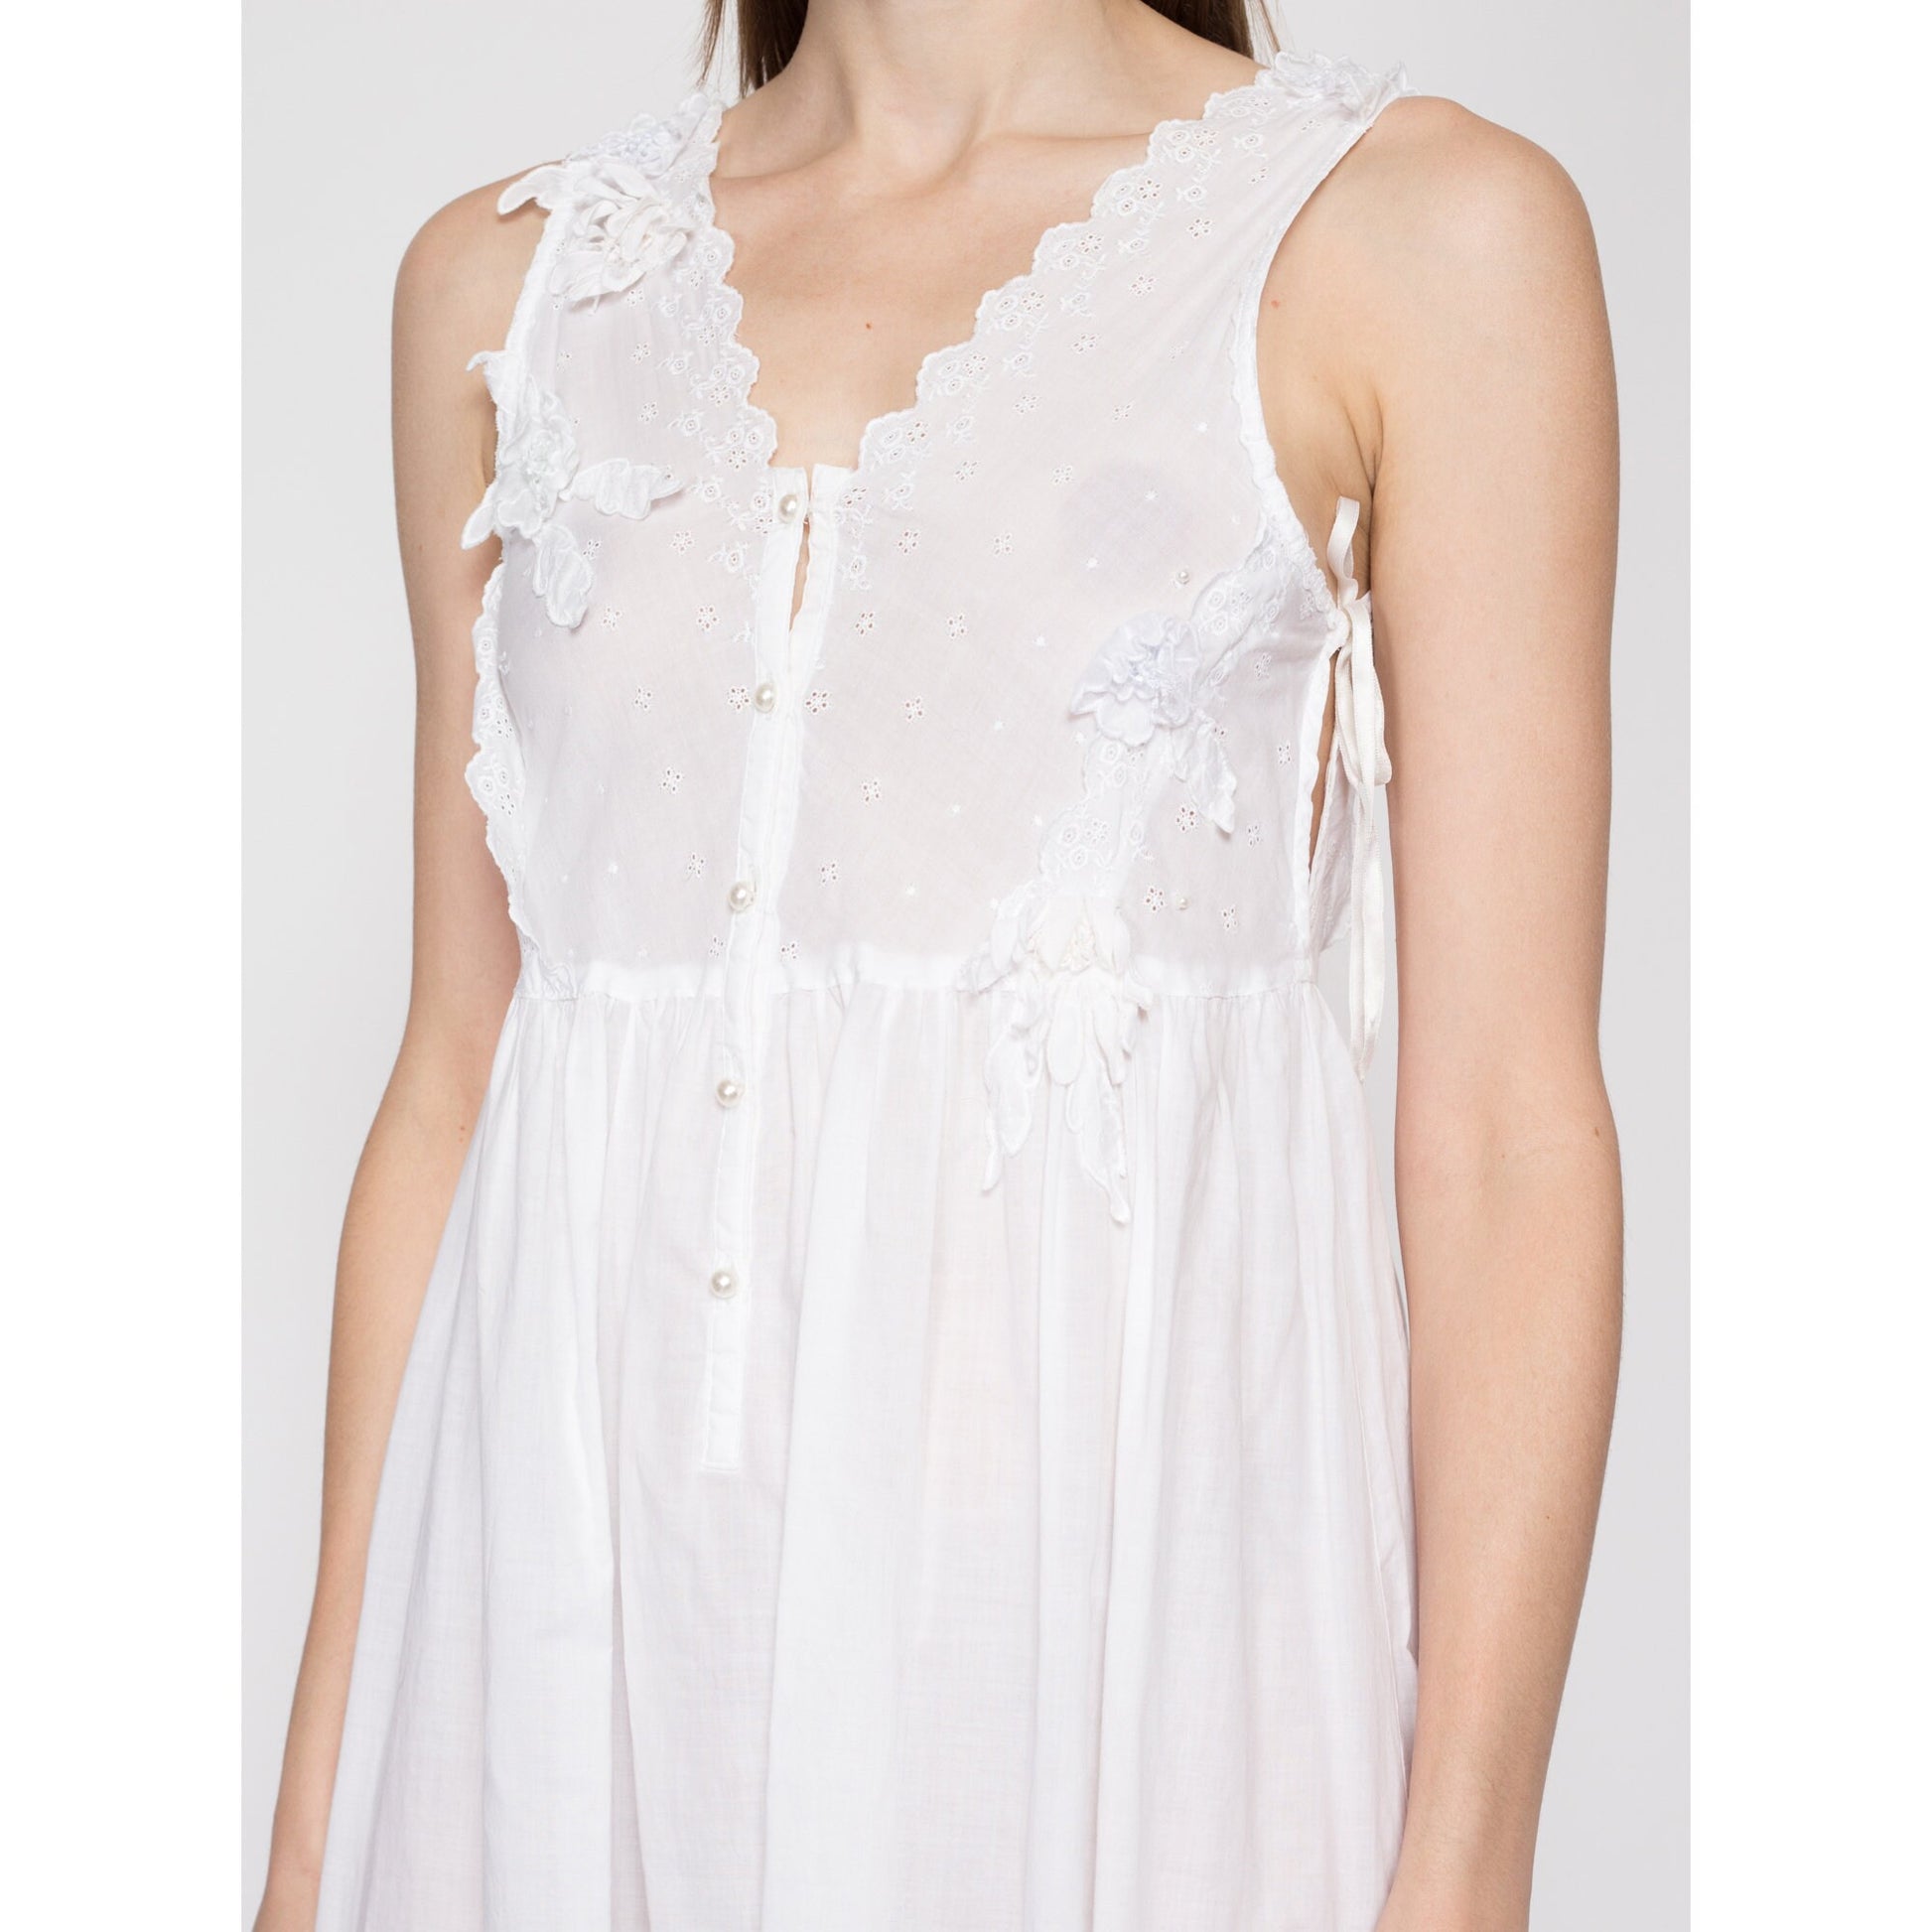 Sheer Nightgown - Shop on Pinterest